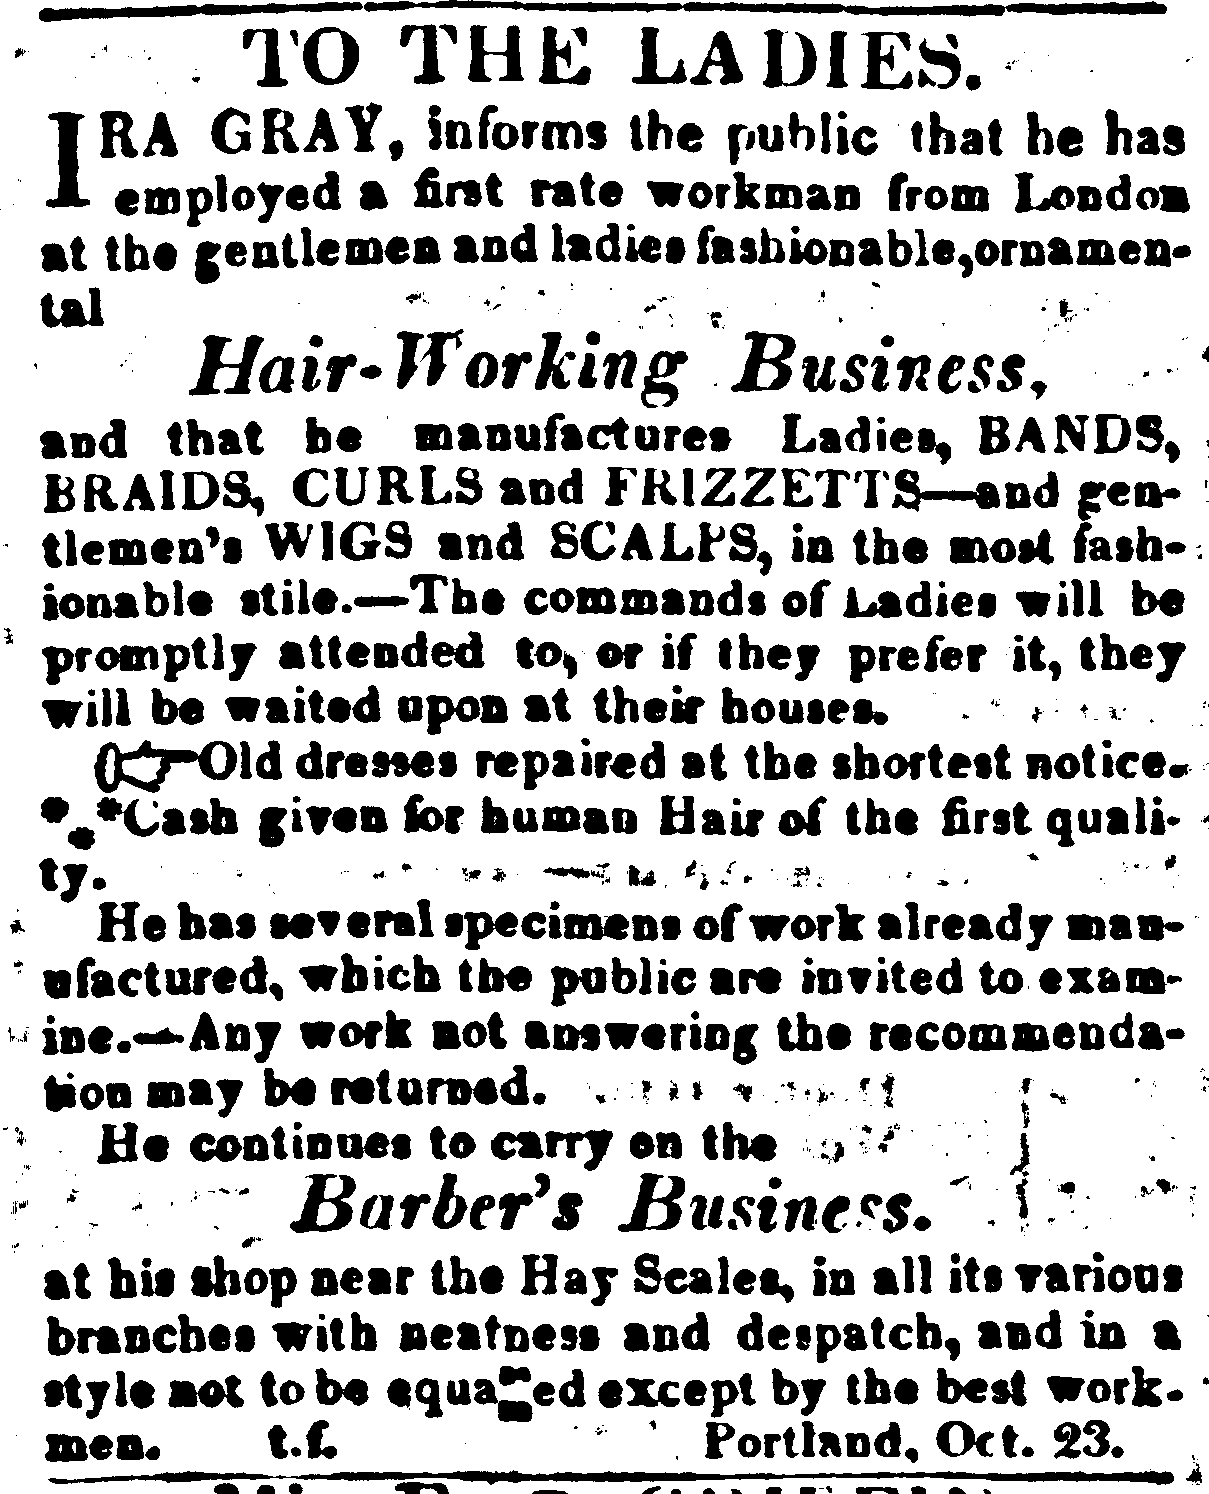 screenshot of a newspaper advertisement: To the Ladies